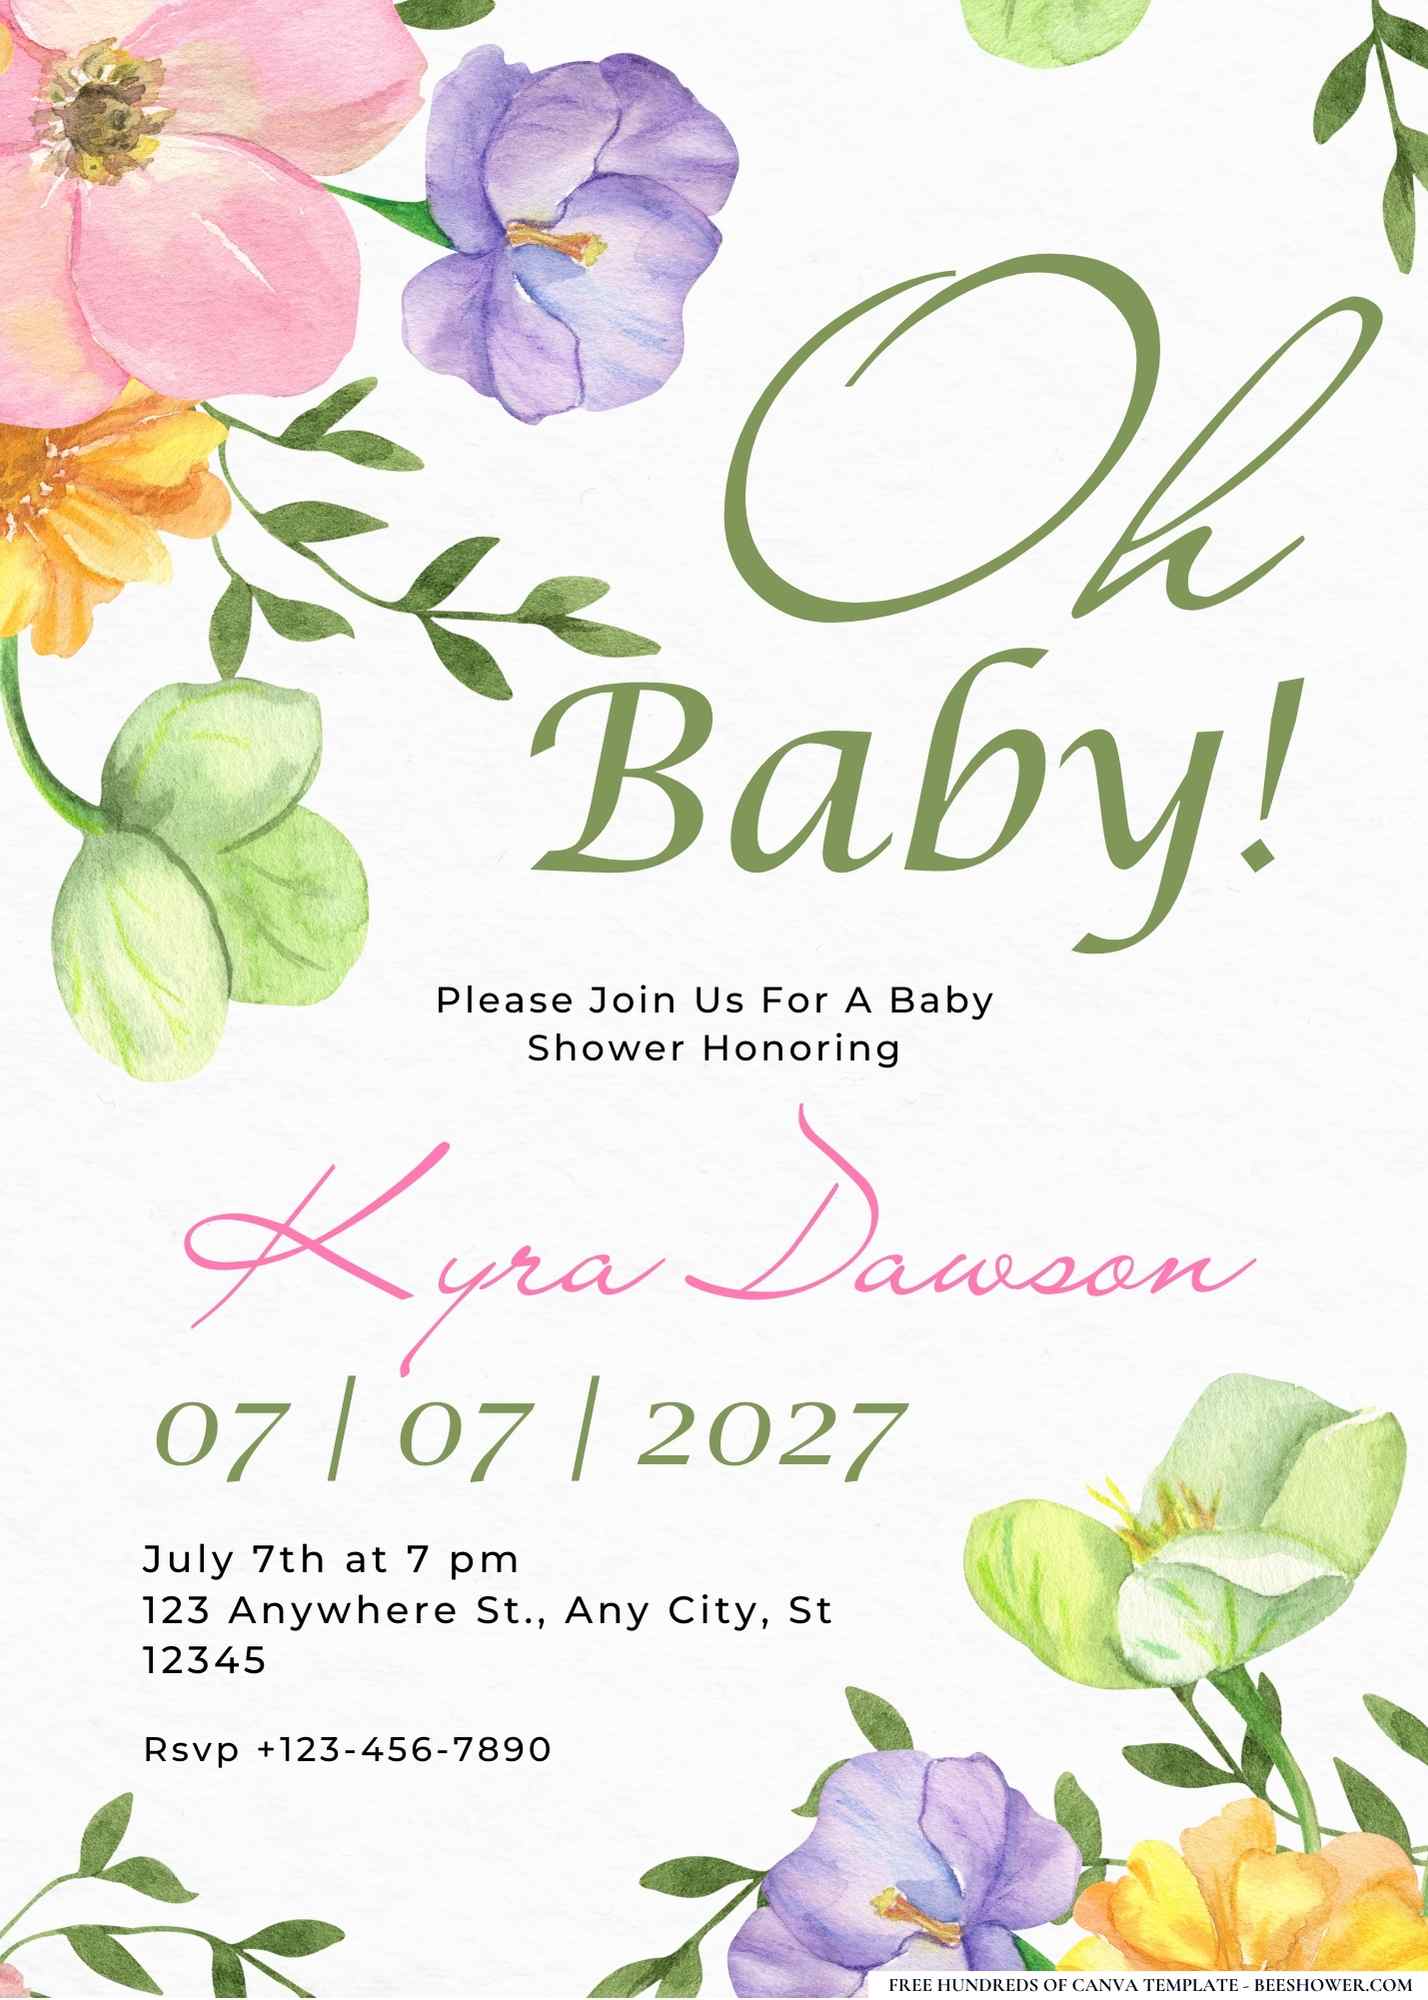 Spring is in the Air Baby Shower Invitation